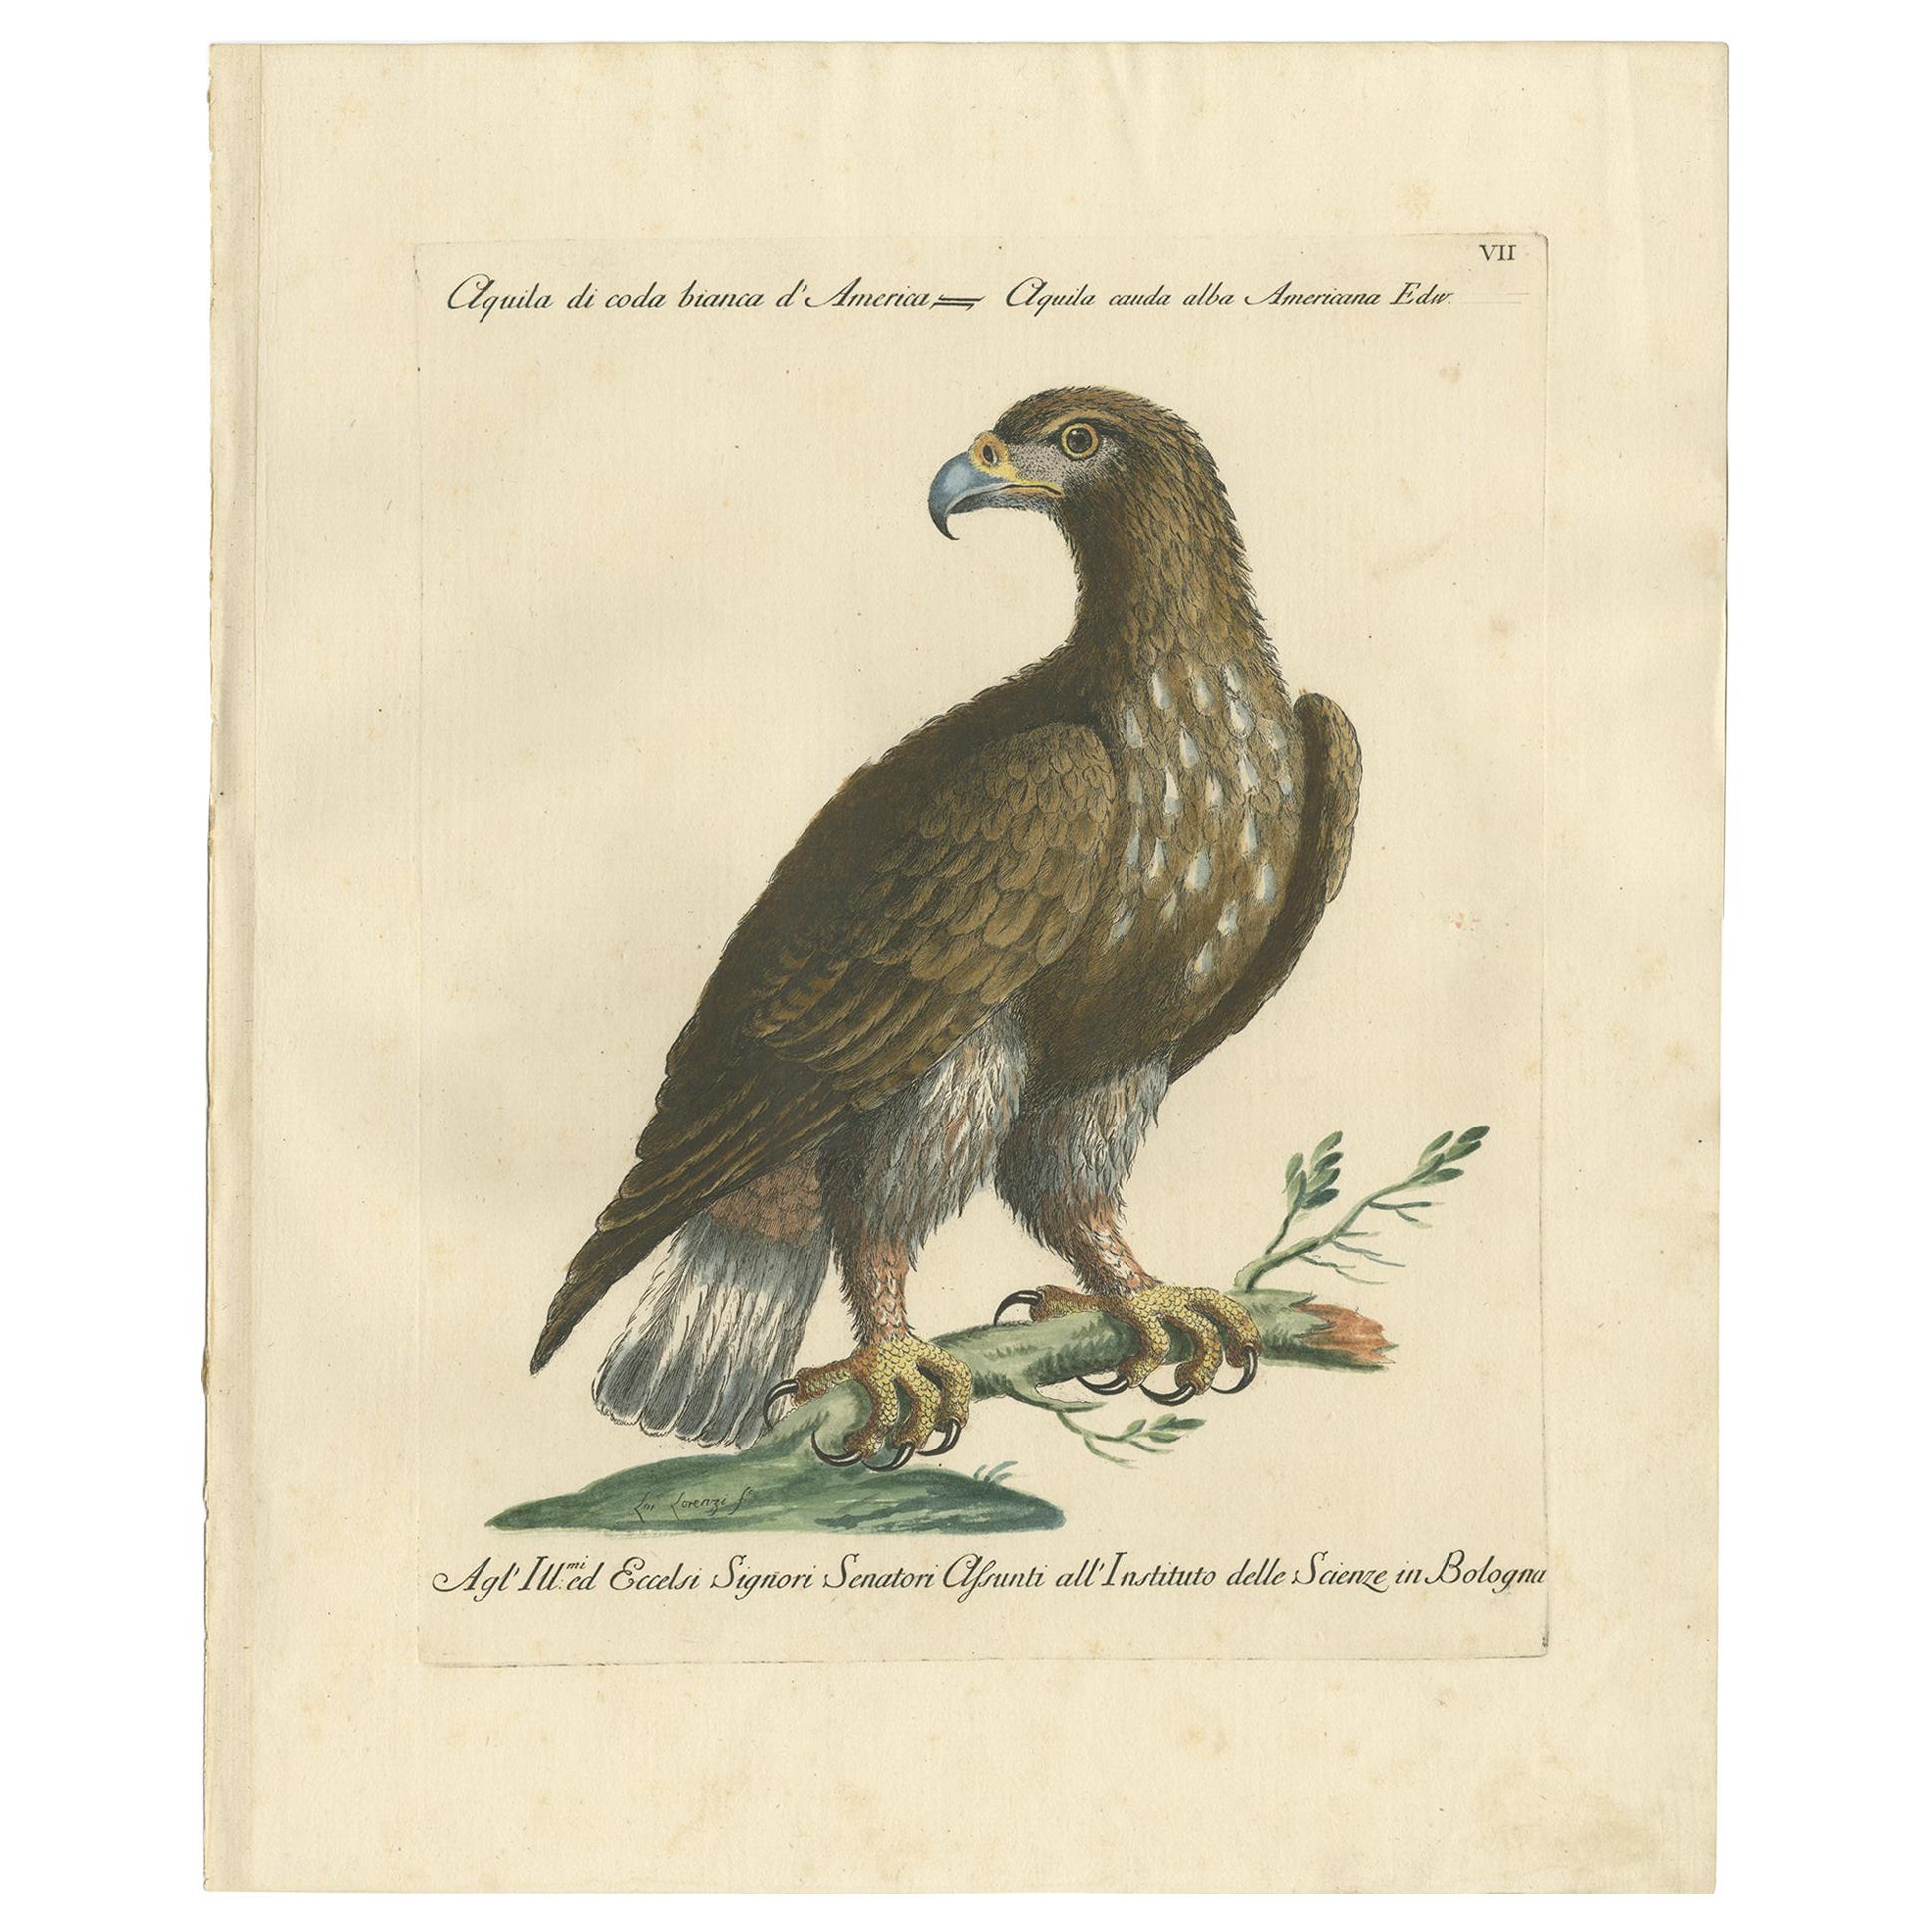 Antique Bird Print of a White-Tailed Eagle by Manetti, circa 1770